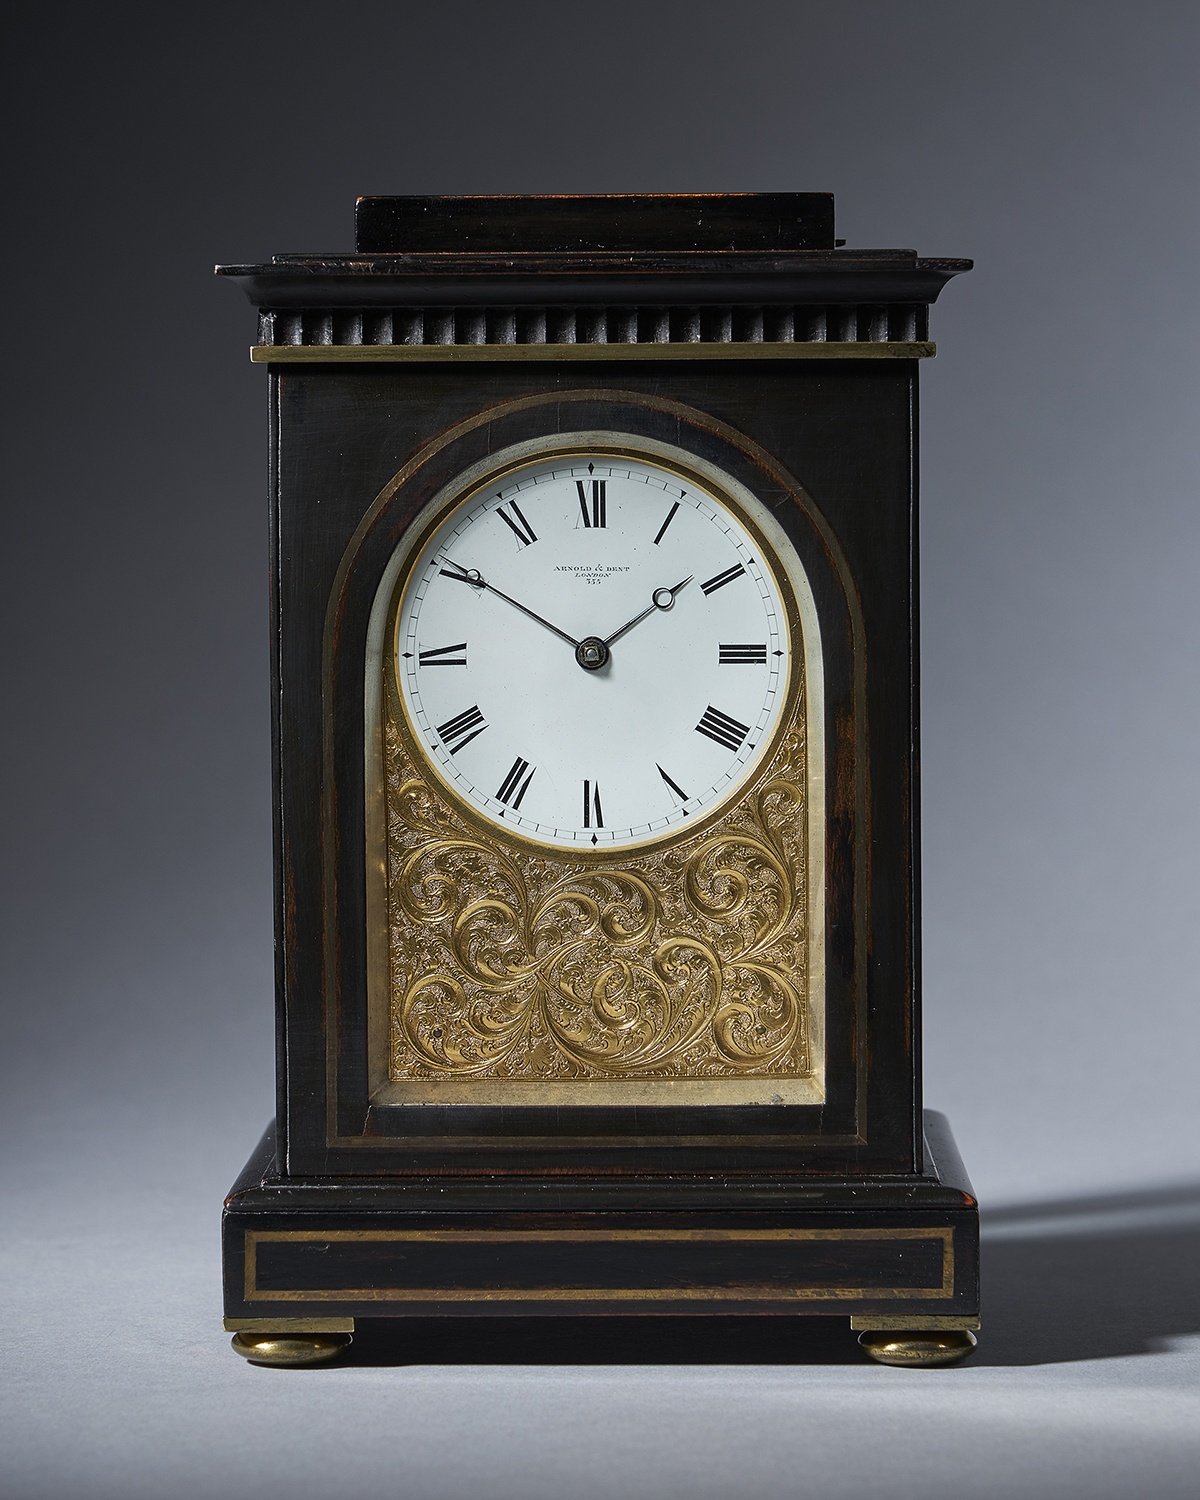 A Unique And Fine Mid 19th-Century Travelling Clock By Celebrated Makers Arnold & Dent, London 3